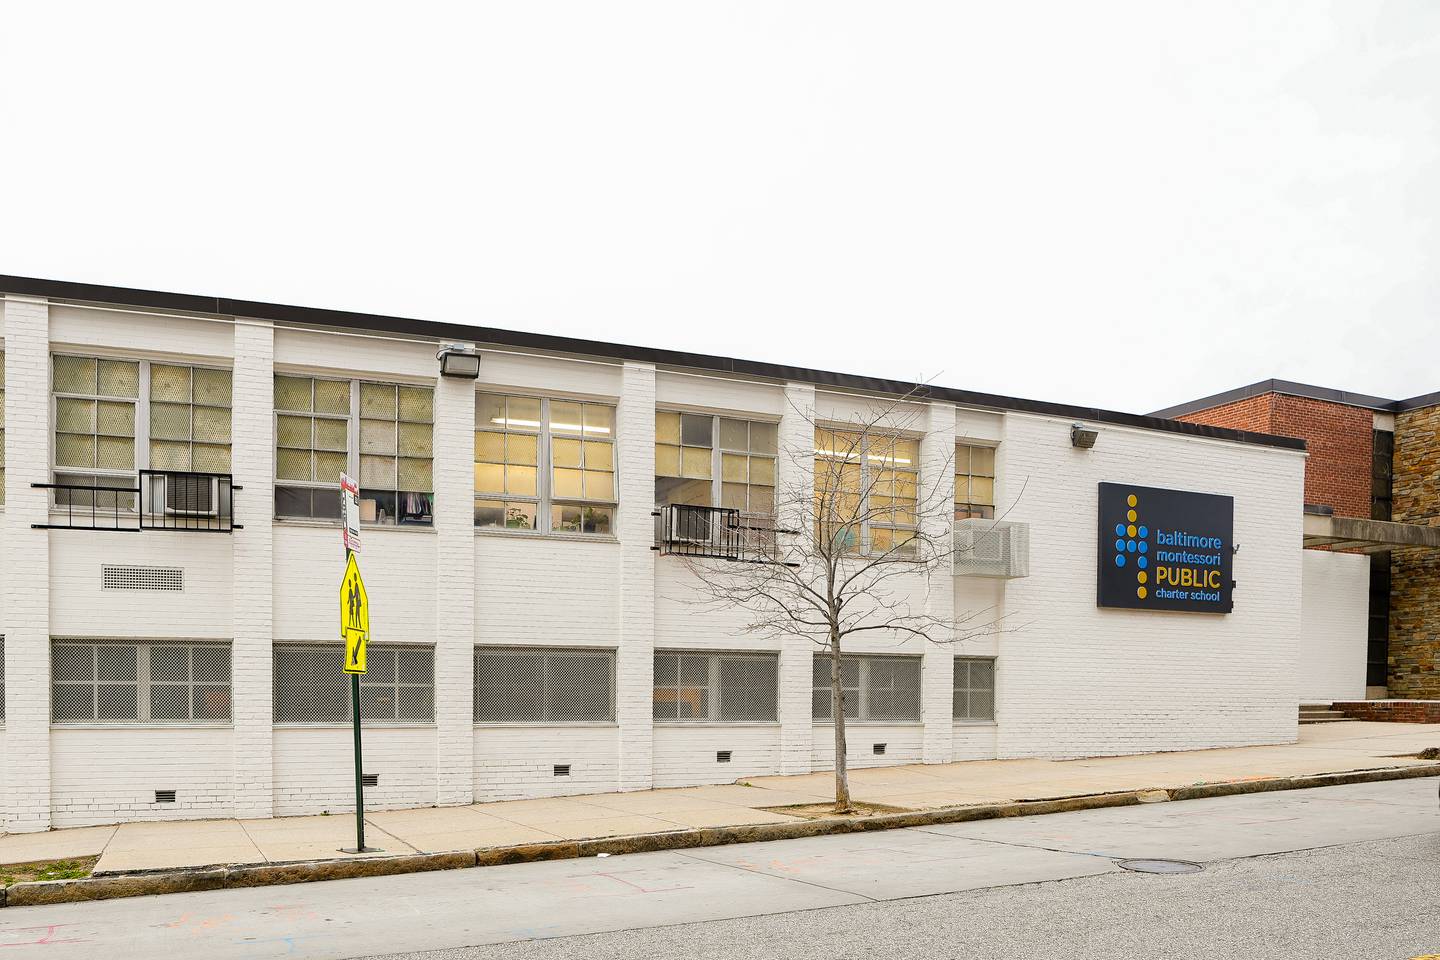 Several Baltimore City charter school operators are asking the Maryland State Department of Education to intervene in the way the city school system funds its charter schools, Baltimore Montessori Public School being one of them, February 7, 2023.